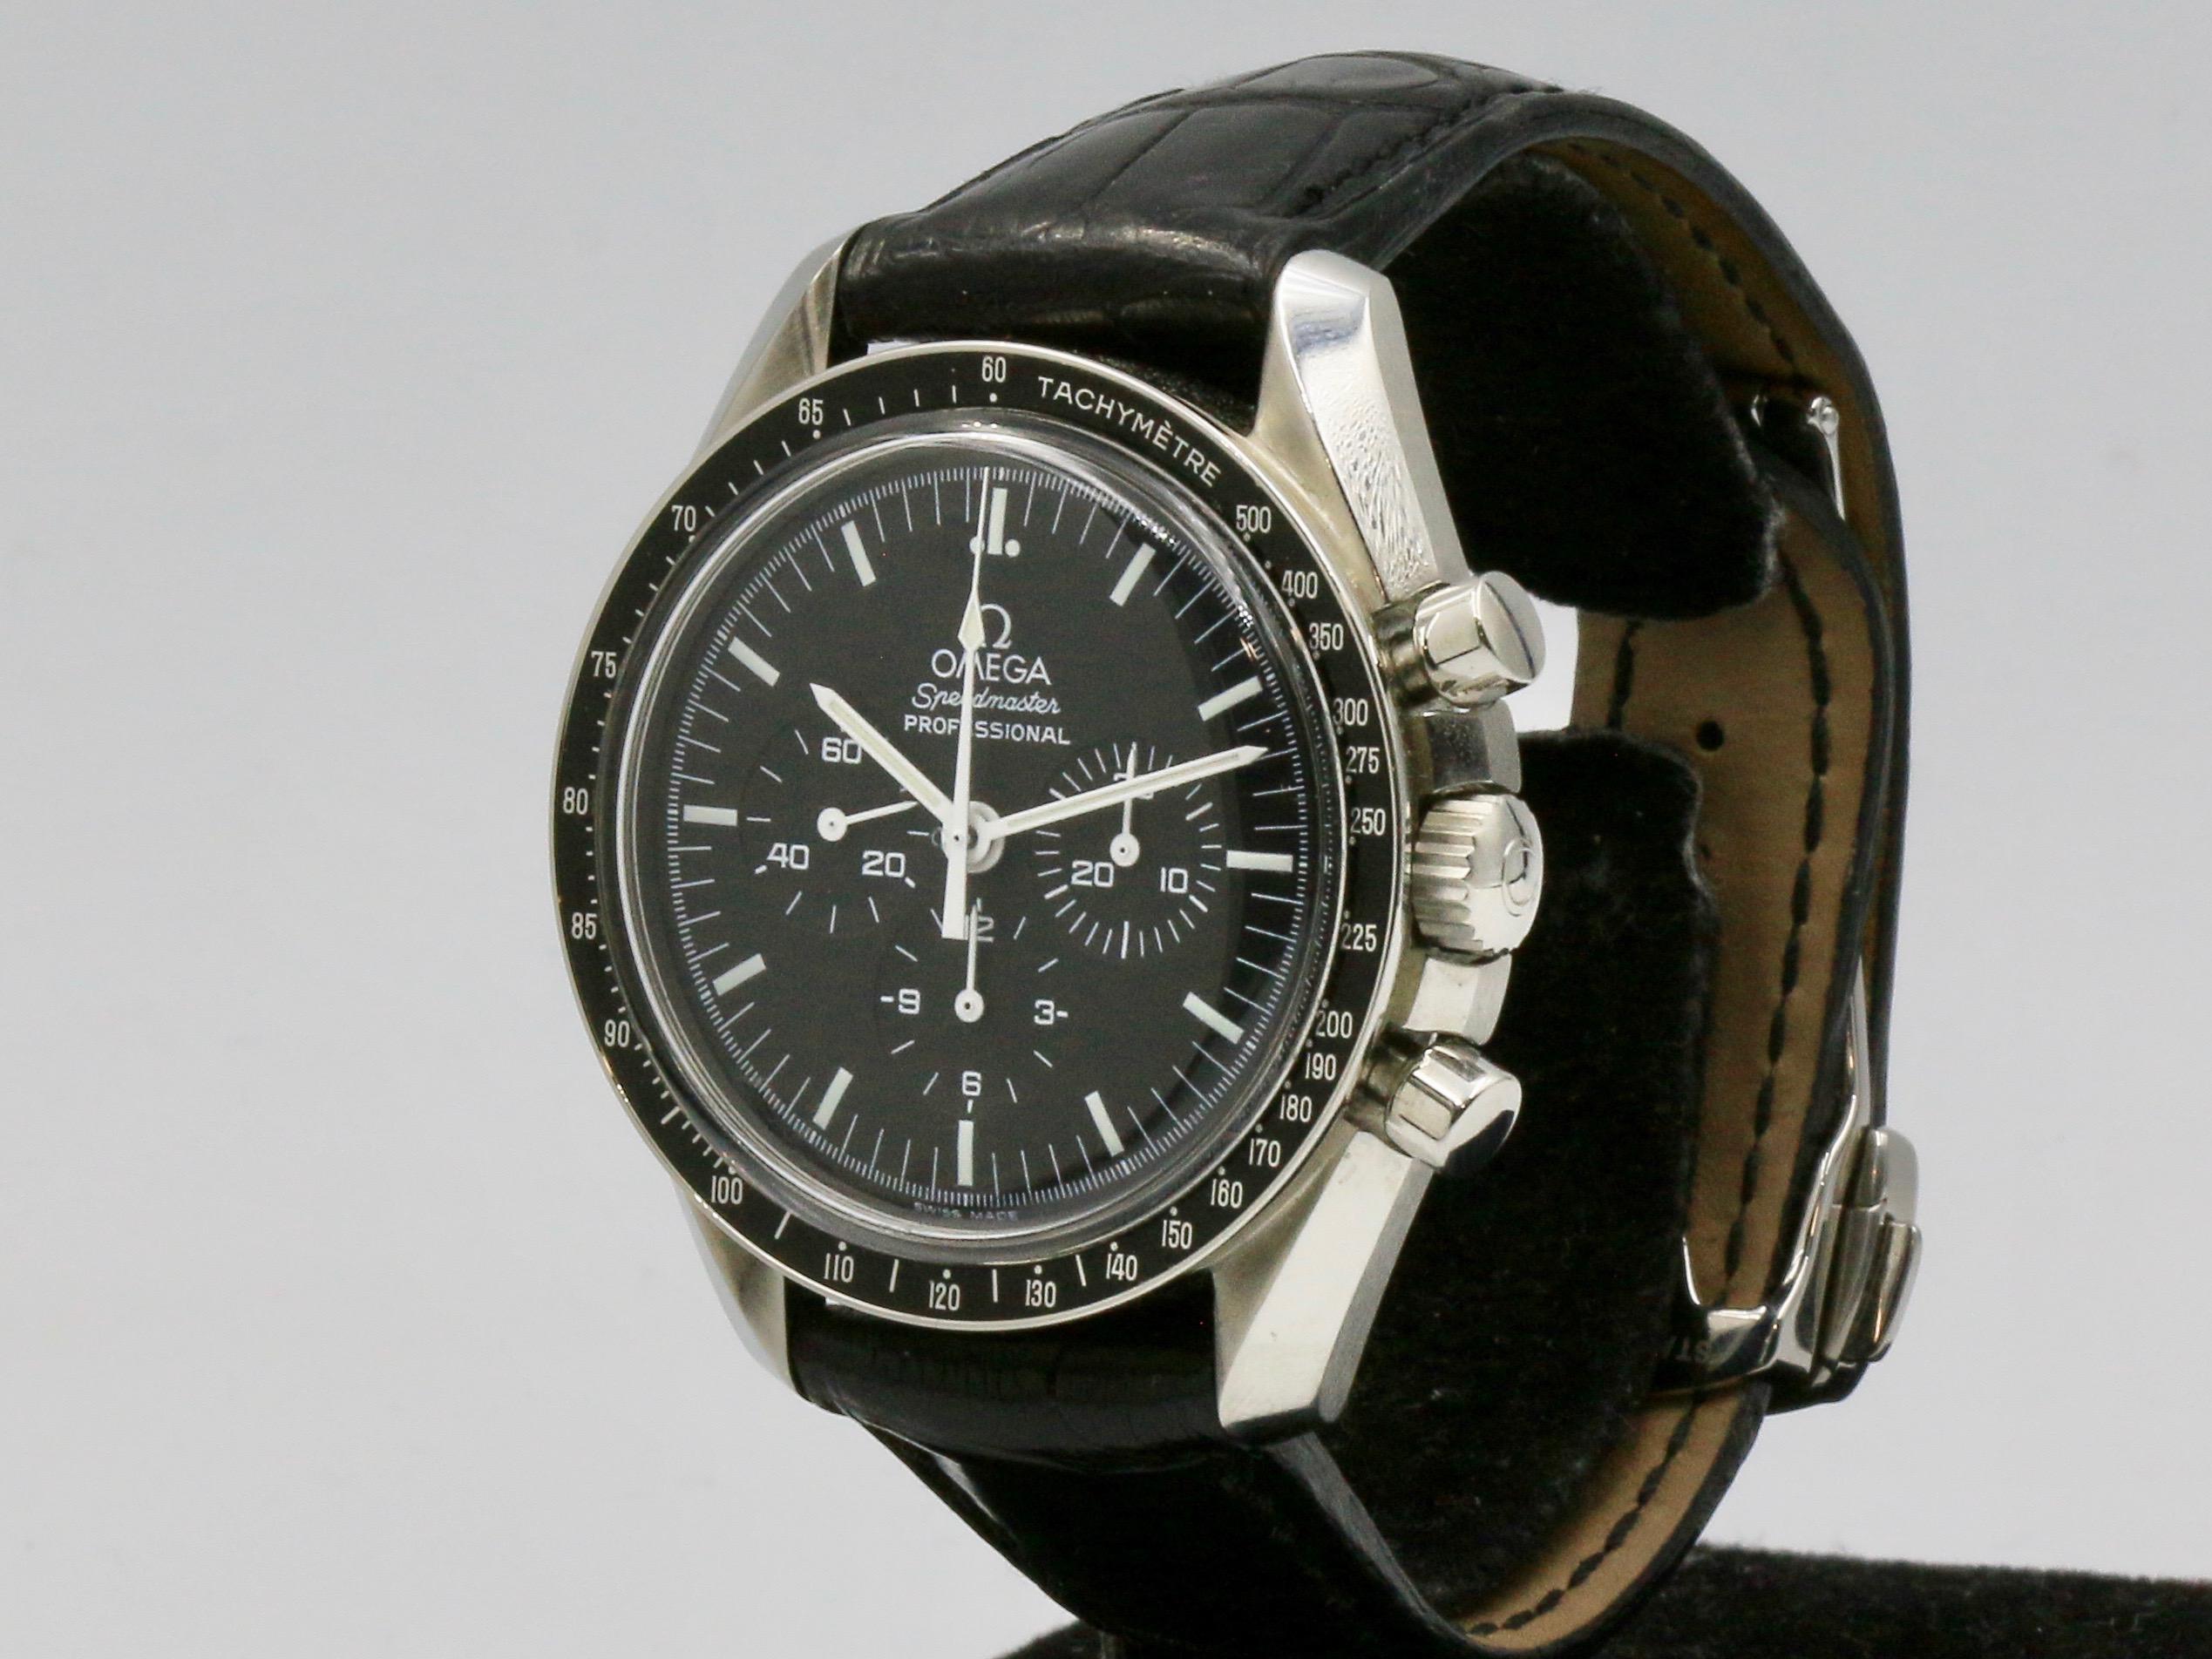 Omega Speedmaster Professional Moonwatch Reference 3570.50.00 In Excellent Condition For Sale In Roma, IT